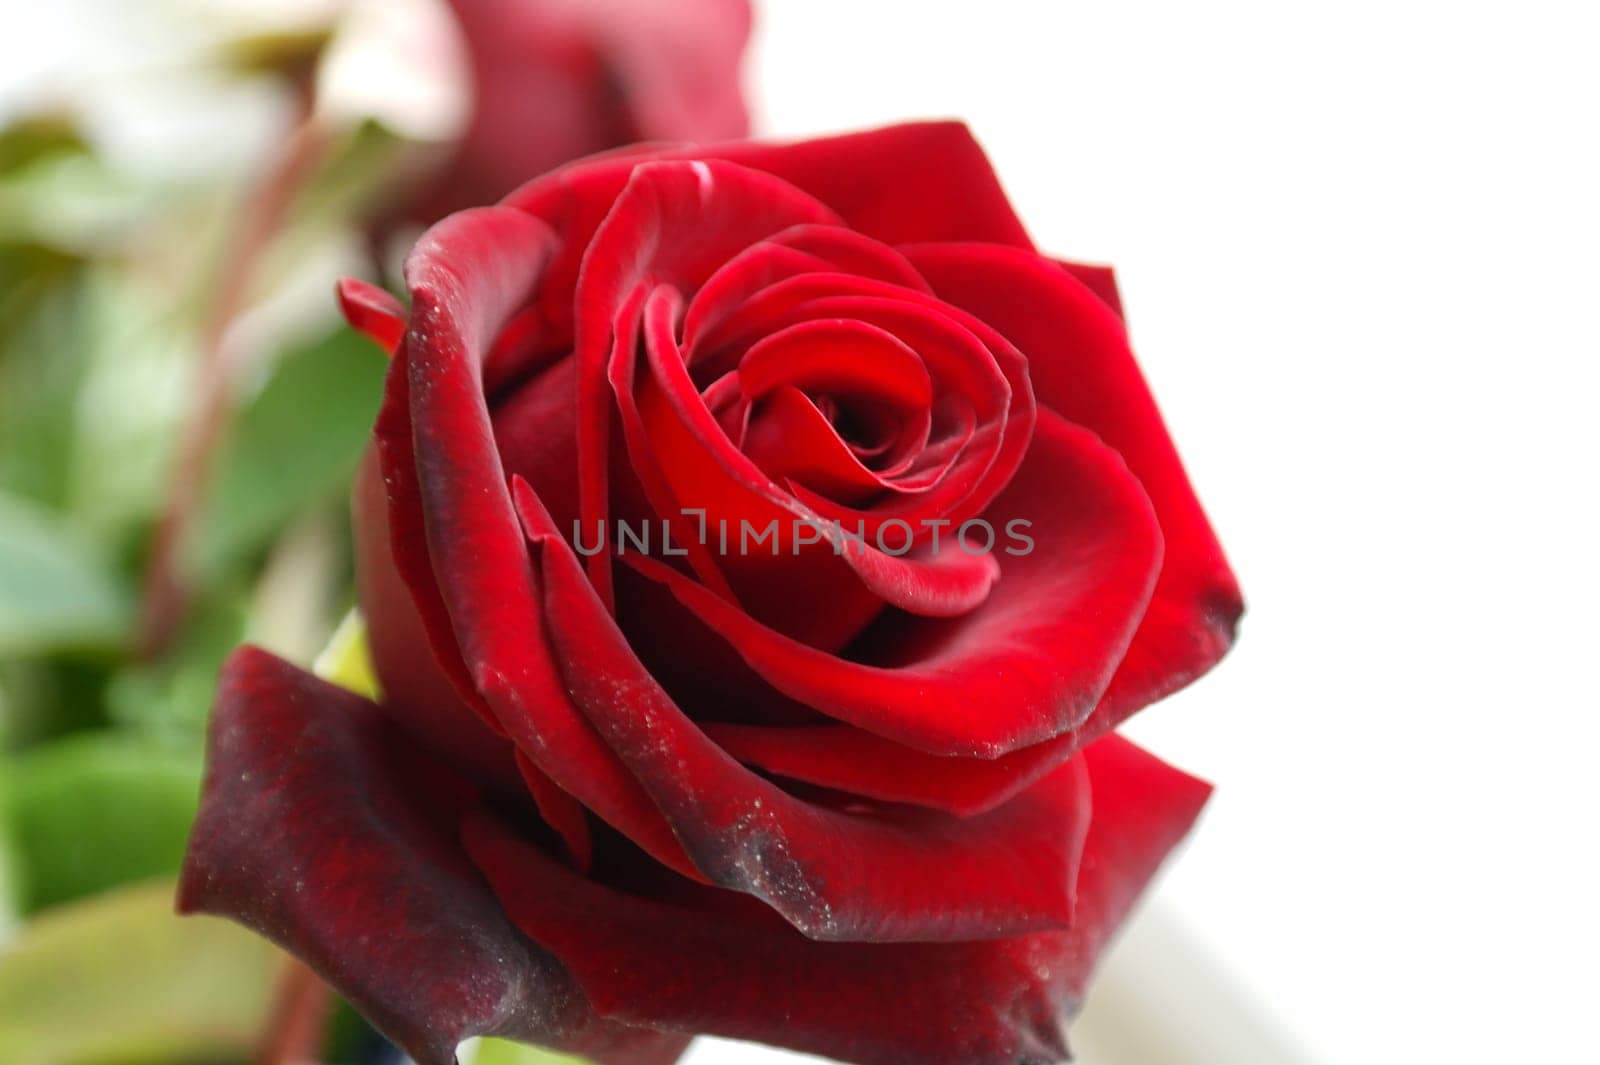 Red rose over blurred background, spring and summer season by fireFLYart